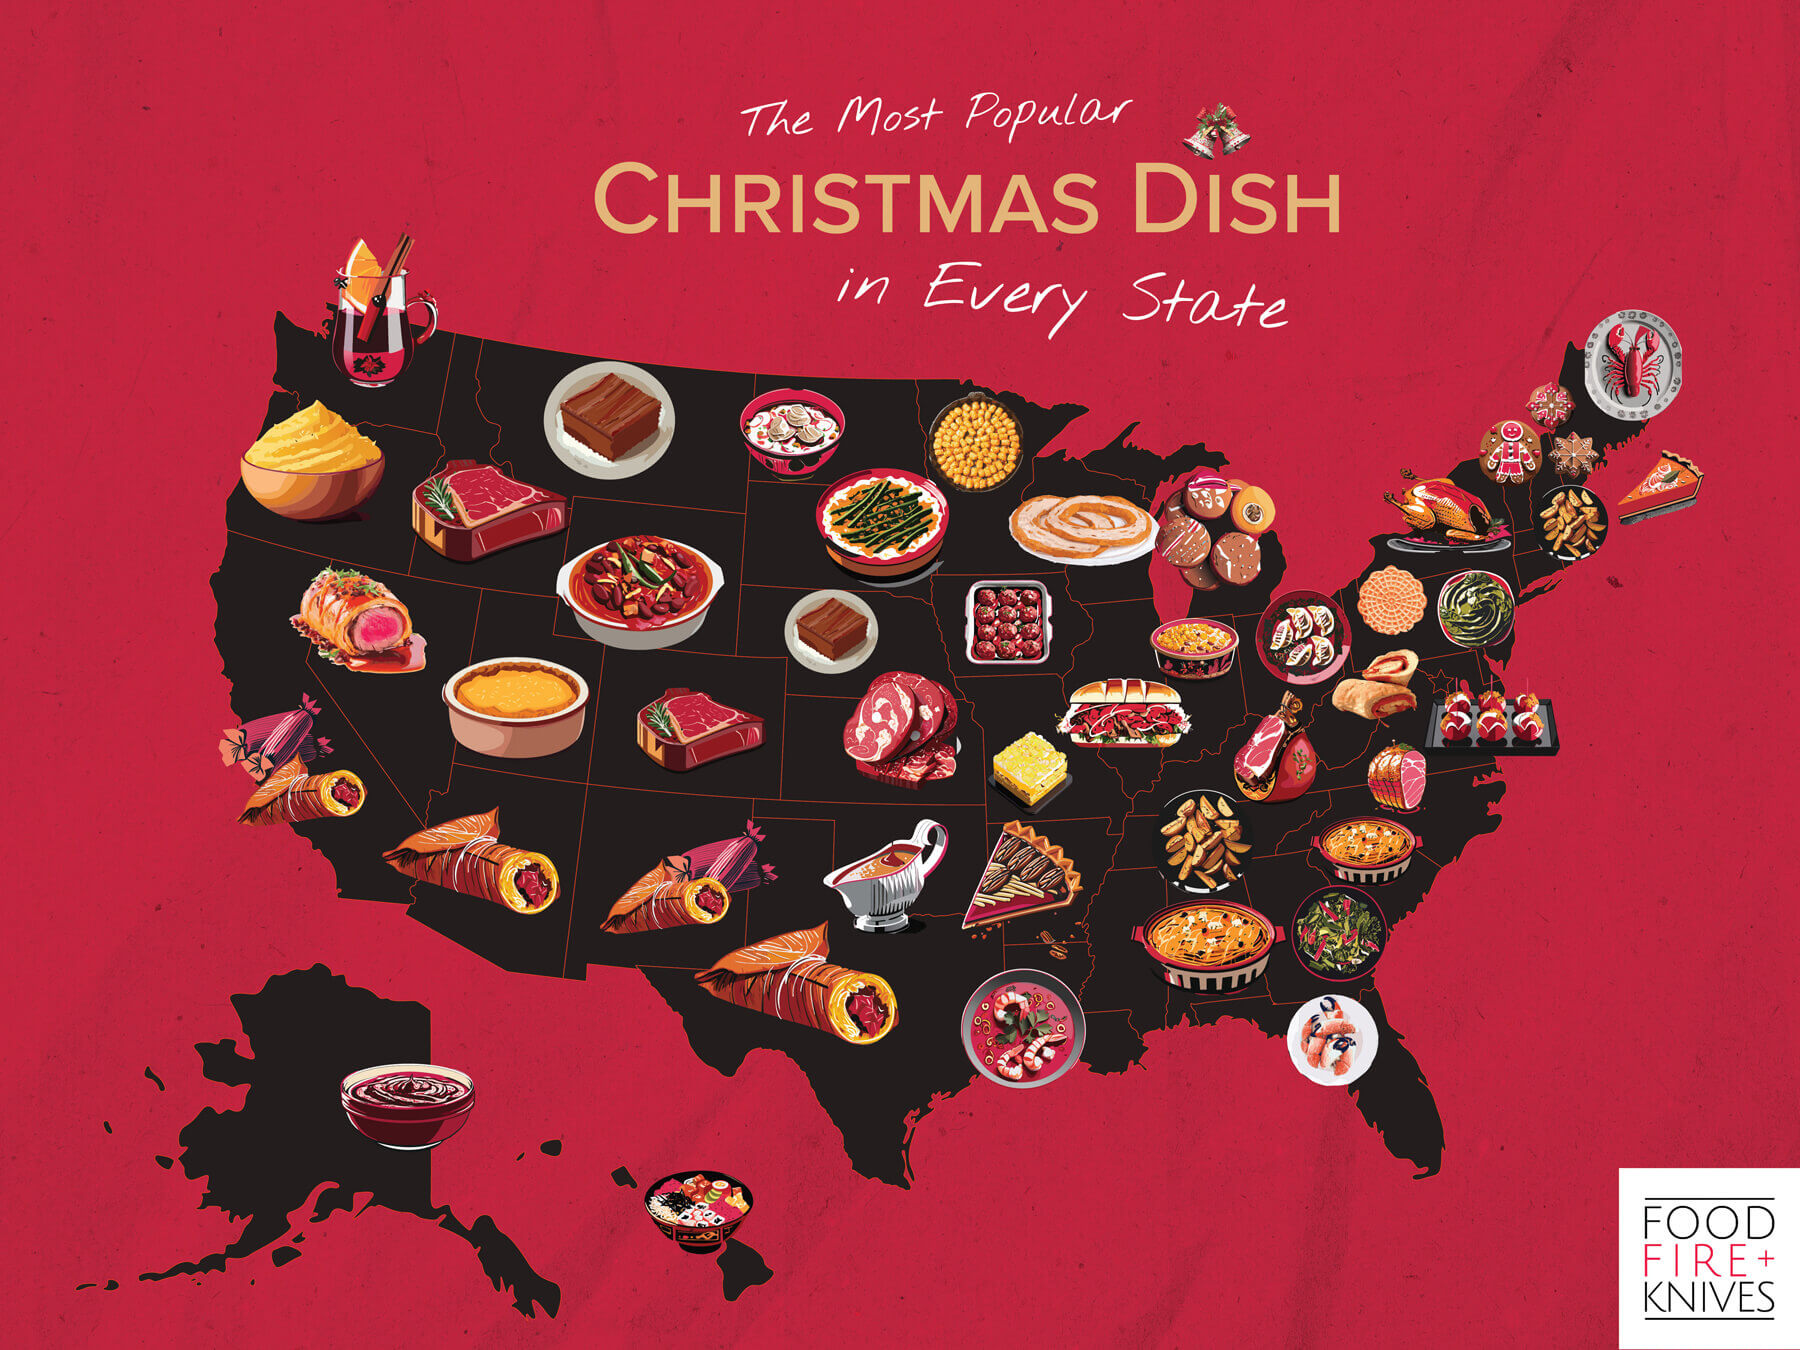 Most Popular Christmas Dish in Every State Infographic for Food Fire Knives